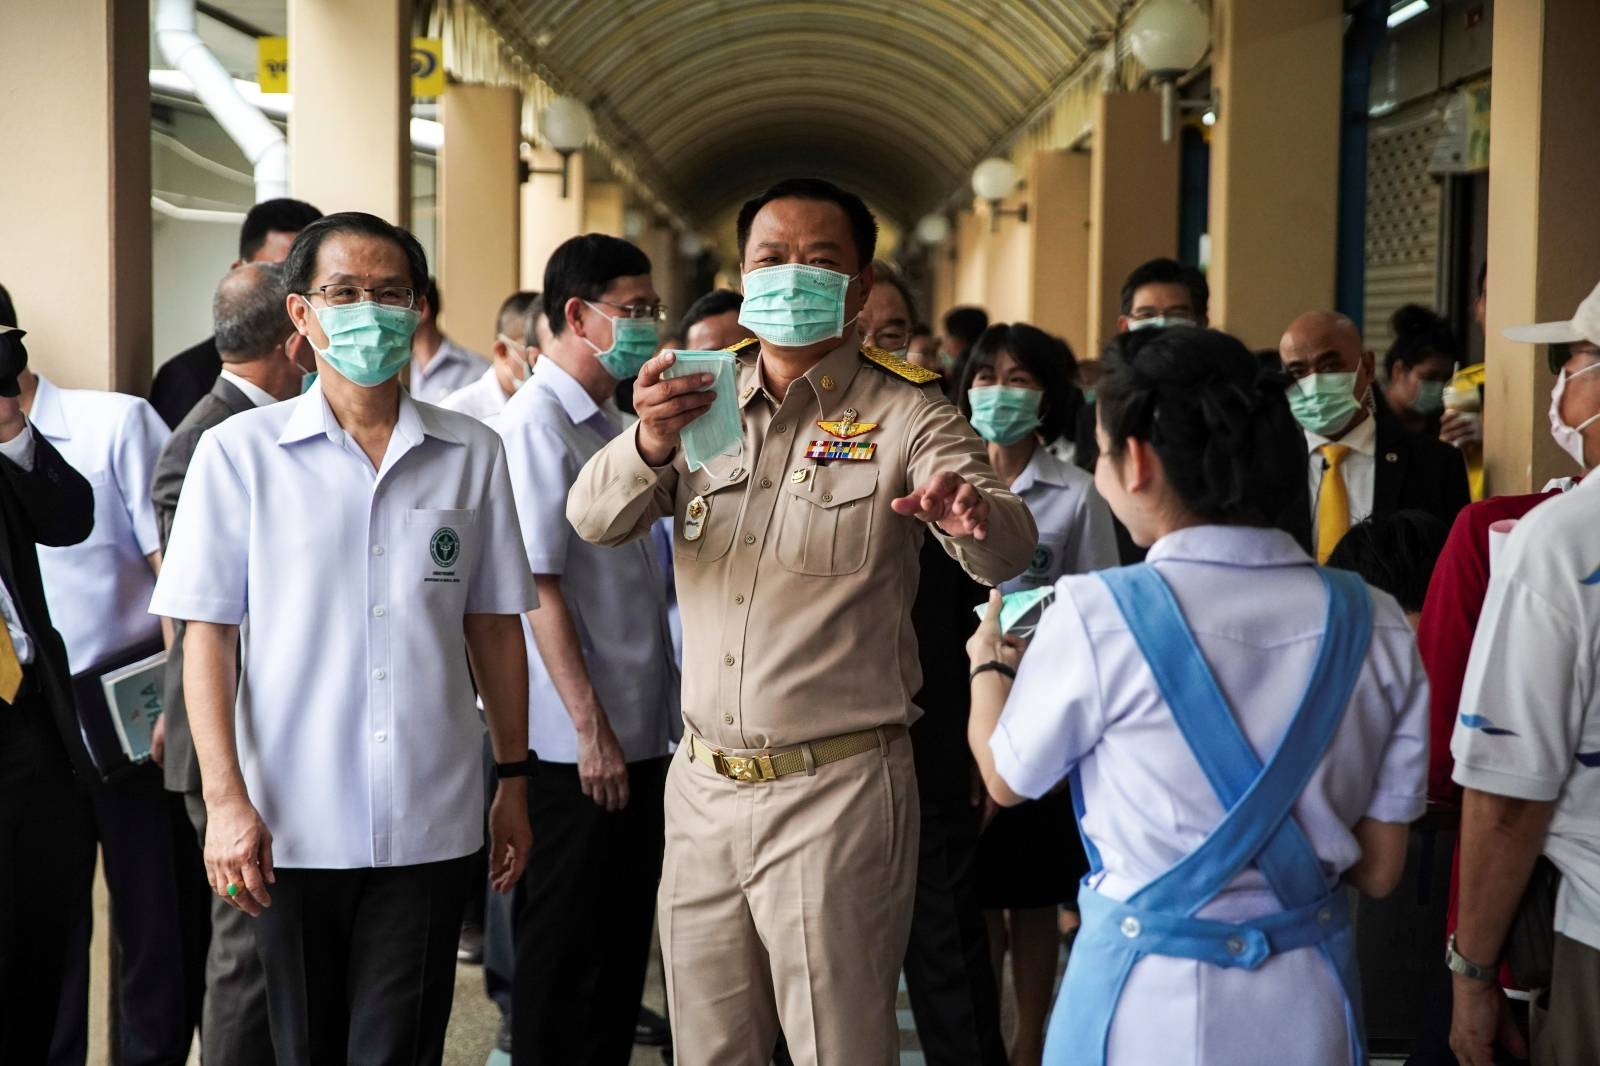 Anutin Charnvirakul, Thailand's Deputy Prime Minister and Minister of Public Health distributes protective face masks to people at a hospital before a news conference about the new coronavirus situation in Bangkok